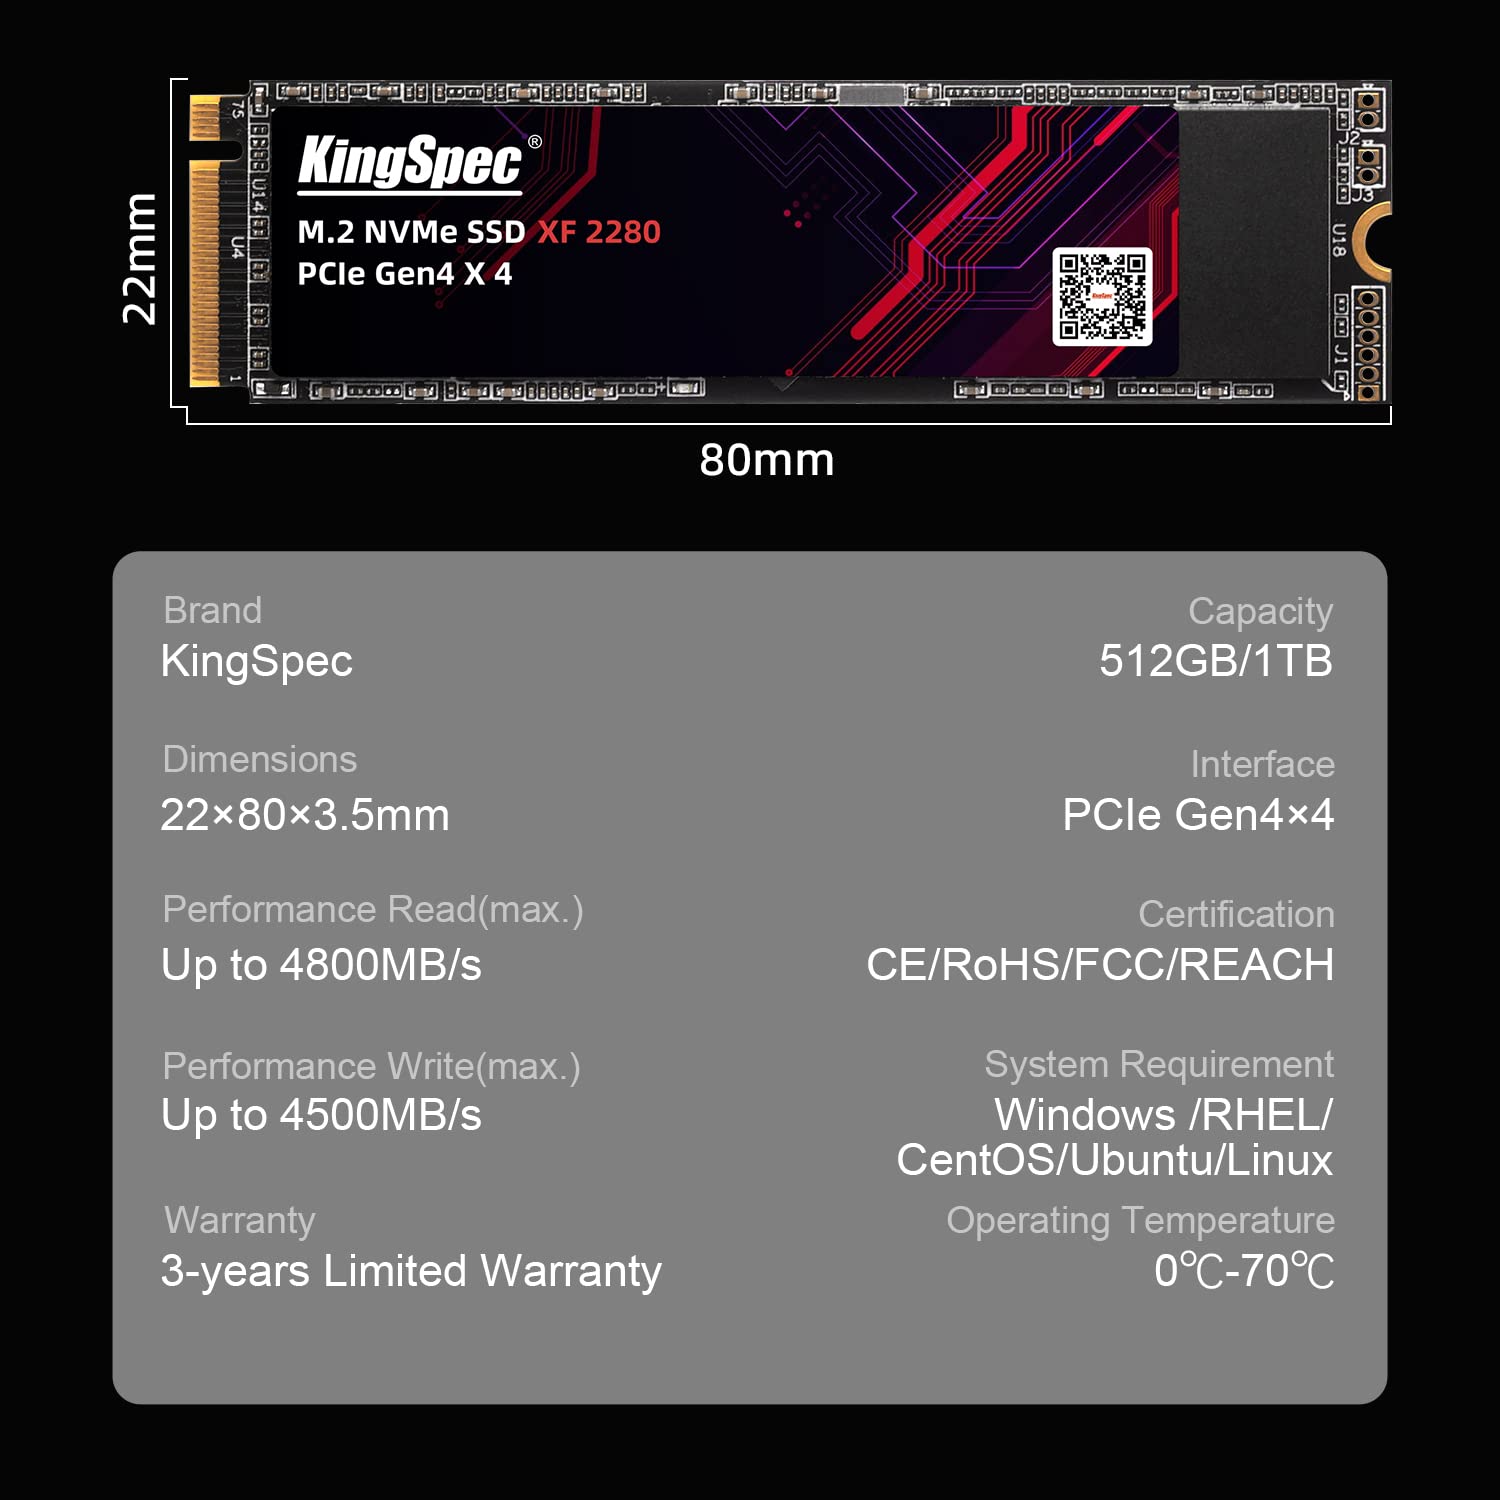 KingSpec 512GB PS5 SSD, M.2 NVMe Gen 4x4 SSD - Up to 4800 MB/s Sequential Read, Internal PCIe 2280 SSD with 3D NAND TLC Flash, Compatible with Desktop/Laptop/Playstation 5 Consoles